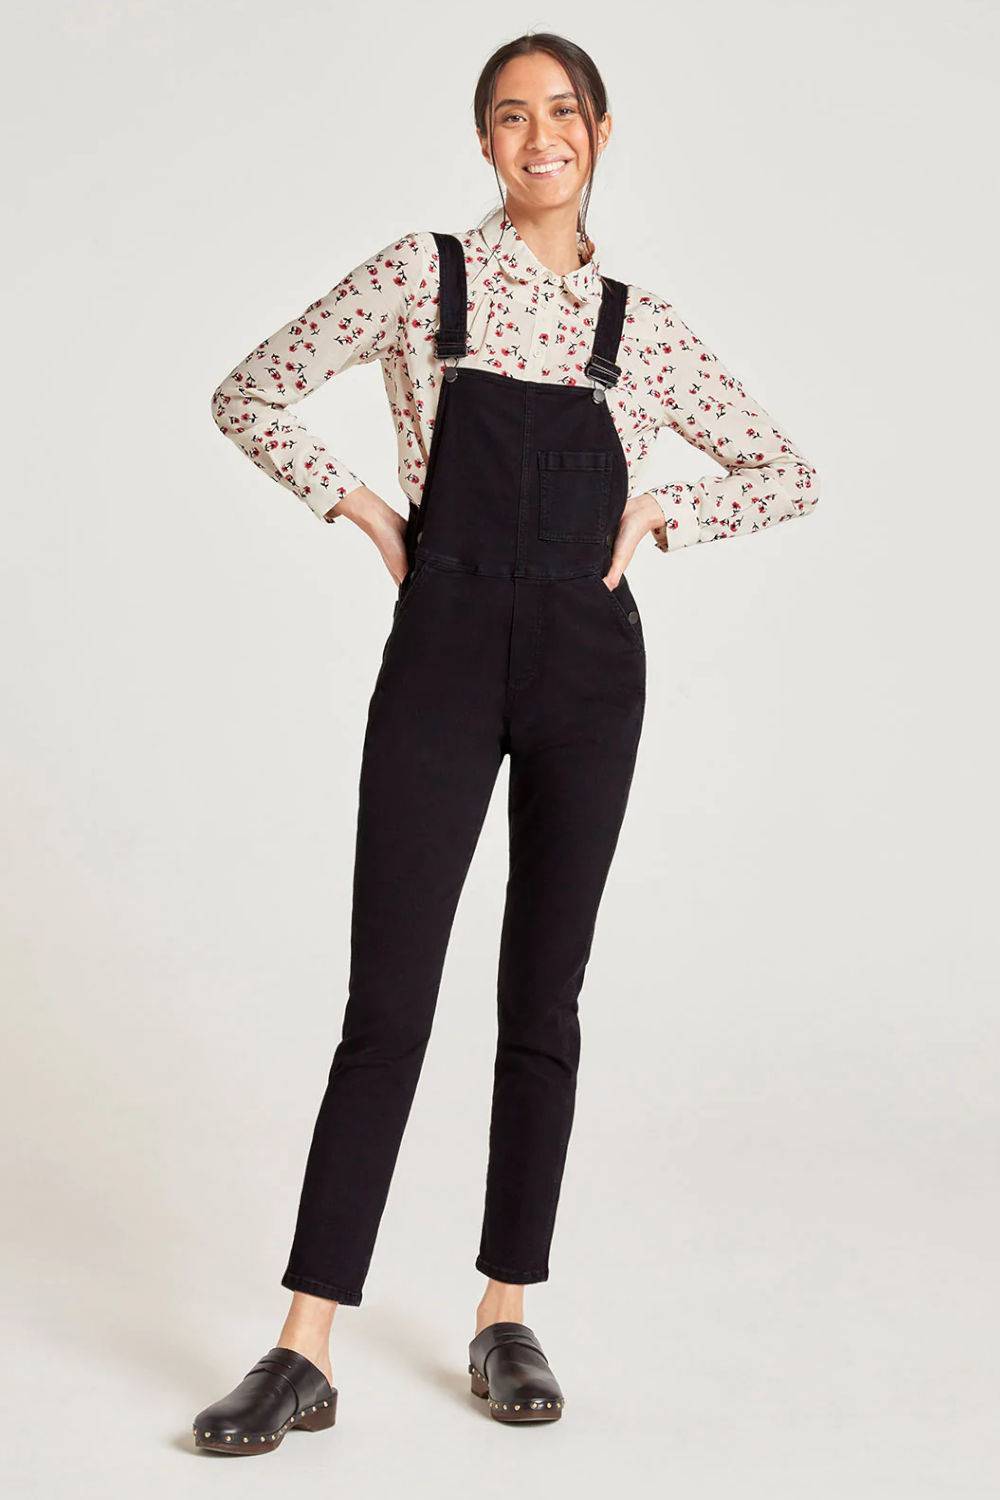 15 Best Ethical And Sustainable Dungarees And Overalls | Panaprium